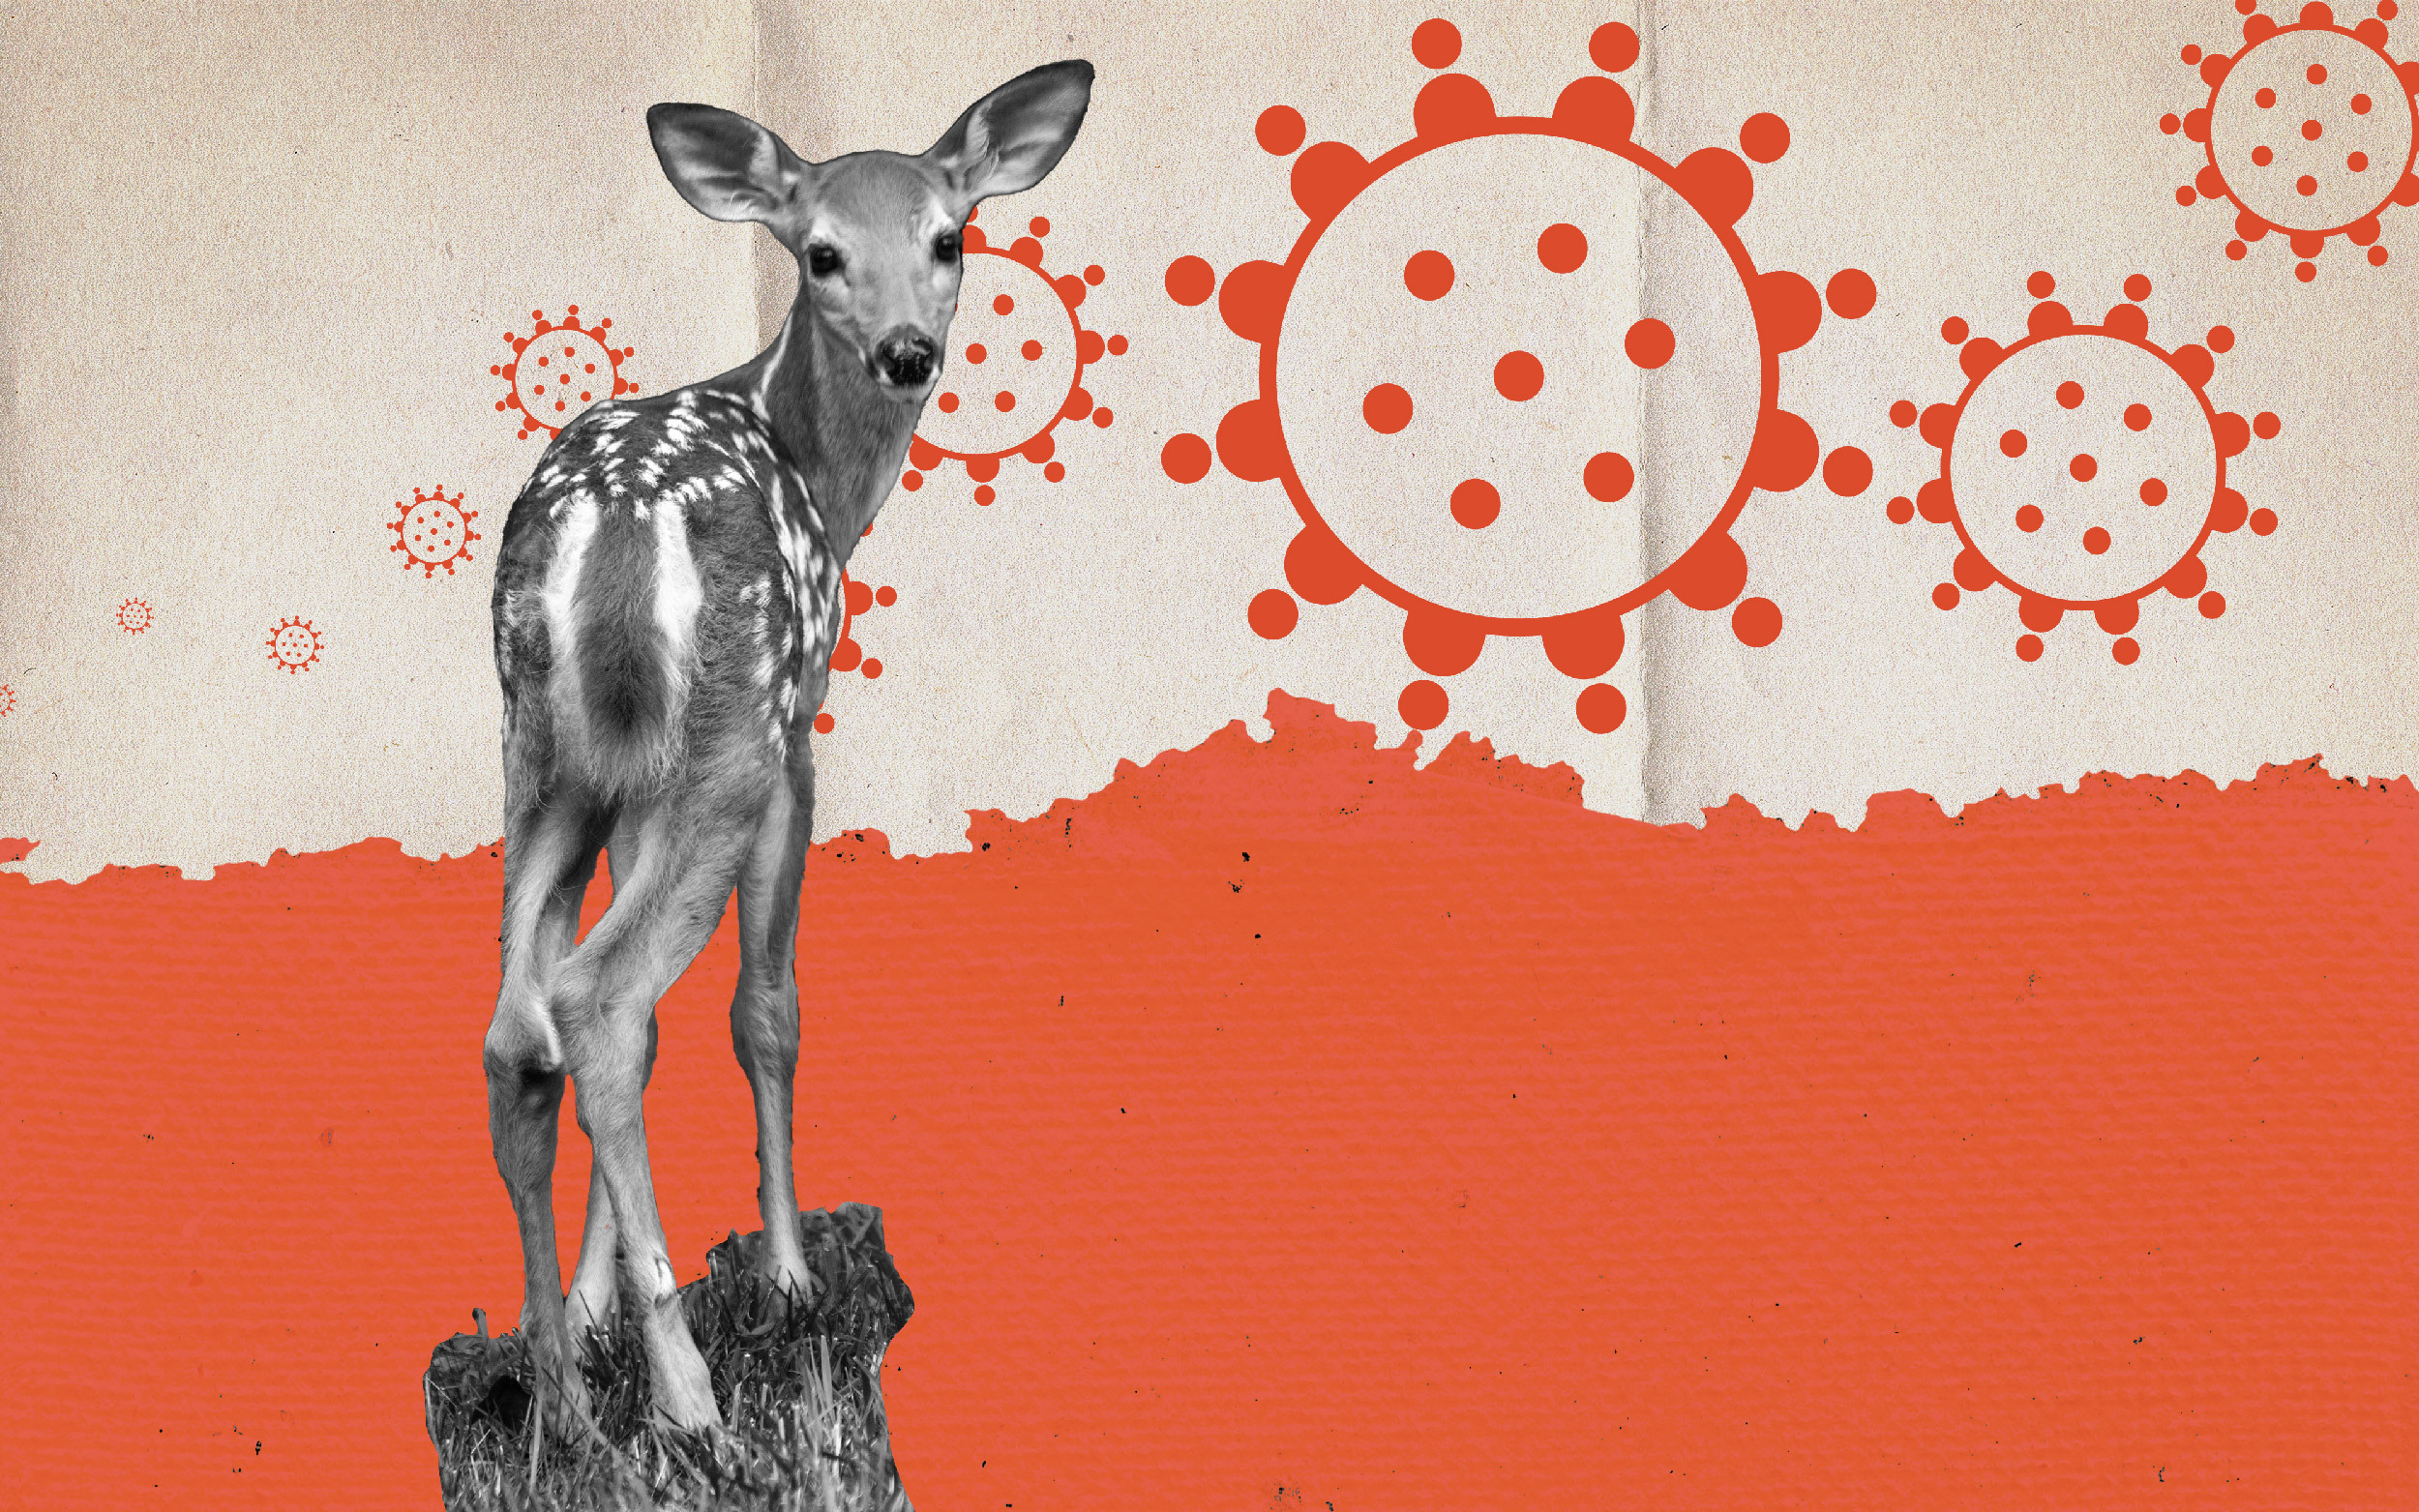 A photo illustration of a deer over a background of viruses.